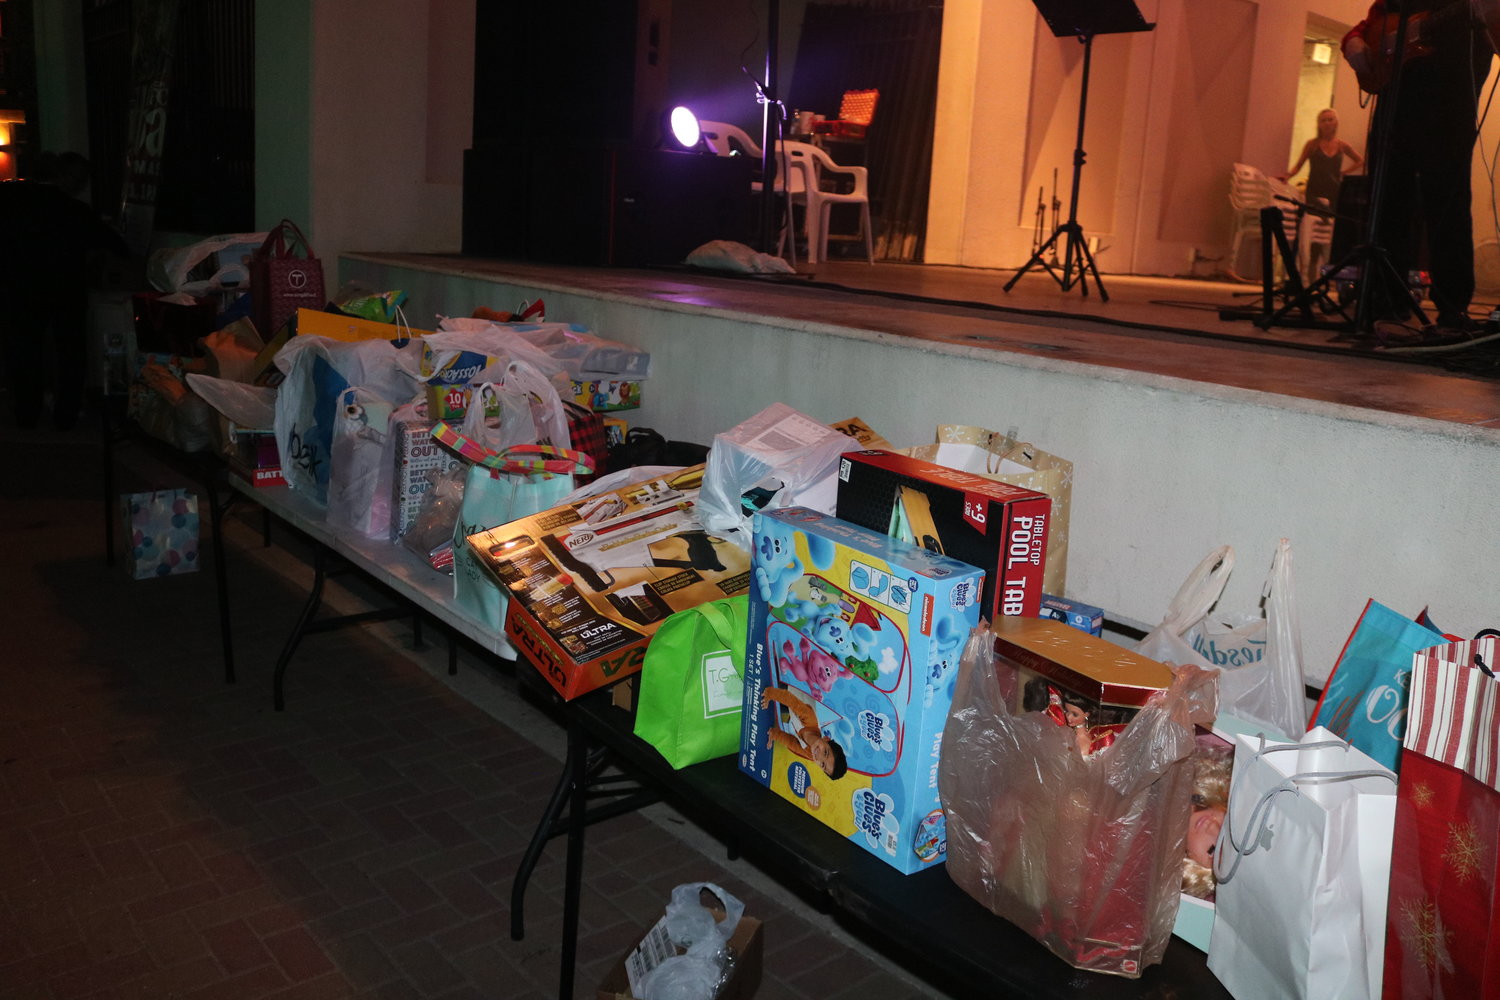 Toys were donated and will go to BEAM, a nonprofit helping children and families in need in the local beach communities.